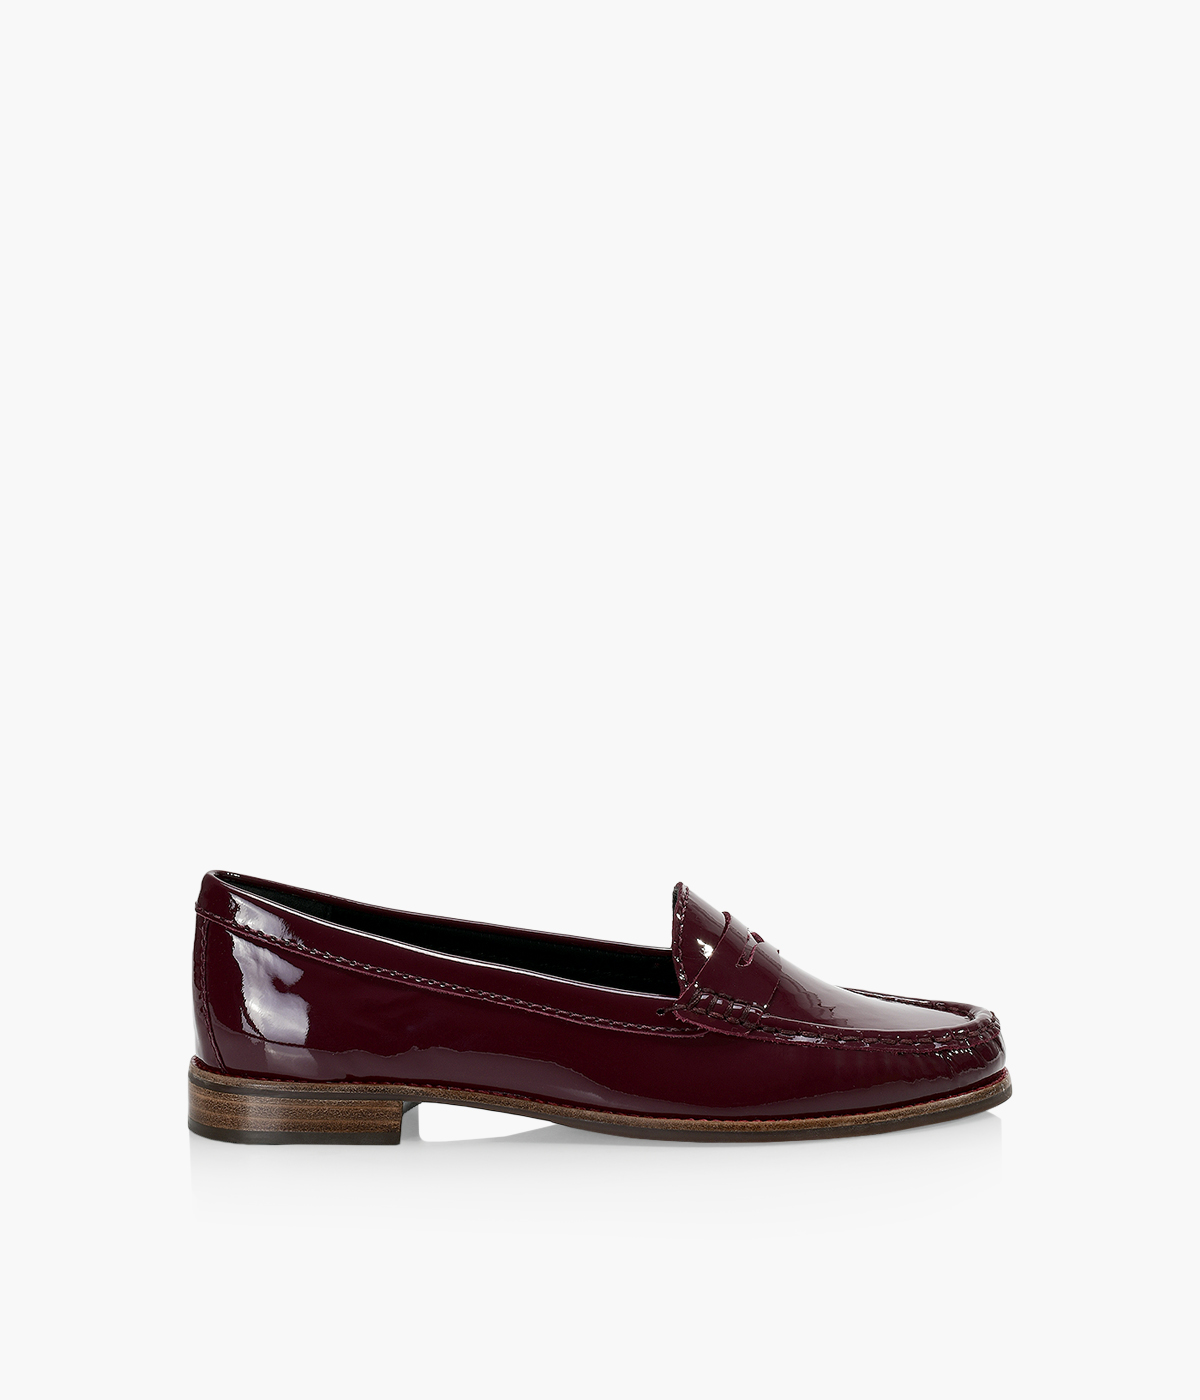 BROWNS FINCH - Patent Leather | Browns Shoes